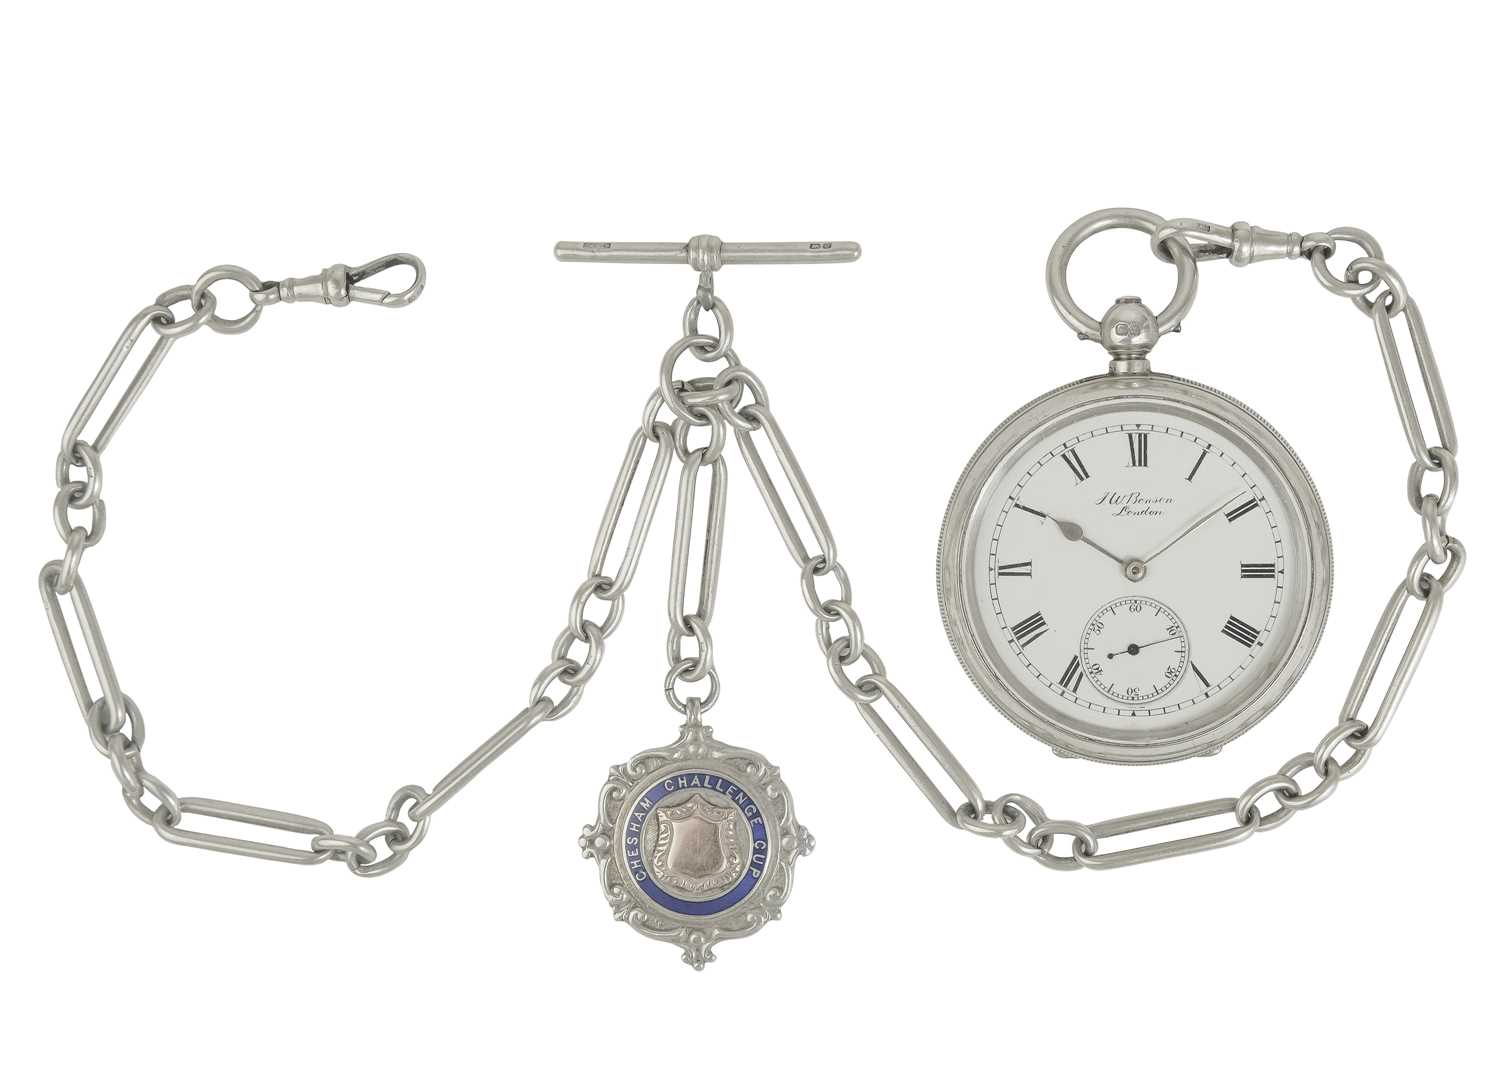 J. W. BENSON - 'THE LUDGATE', a silver cased key wind lever pocket watch.